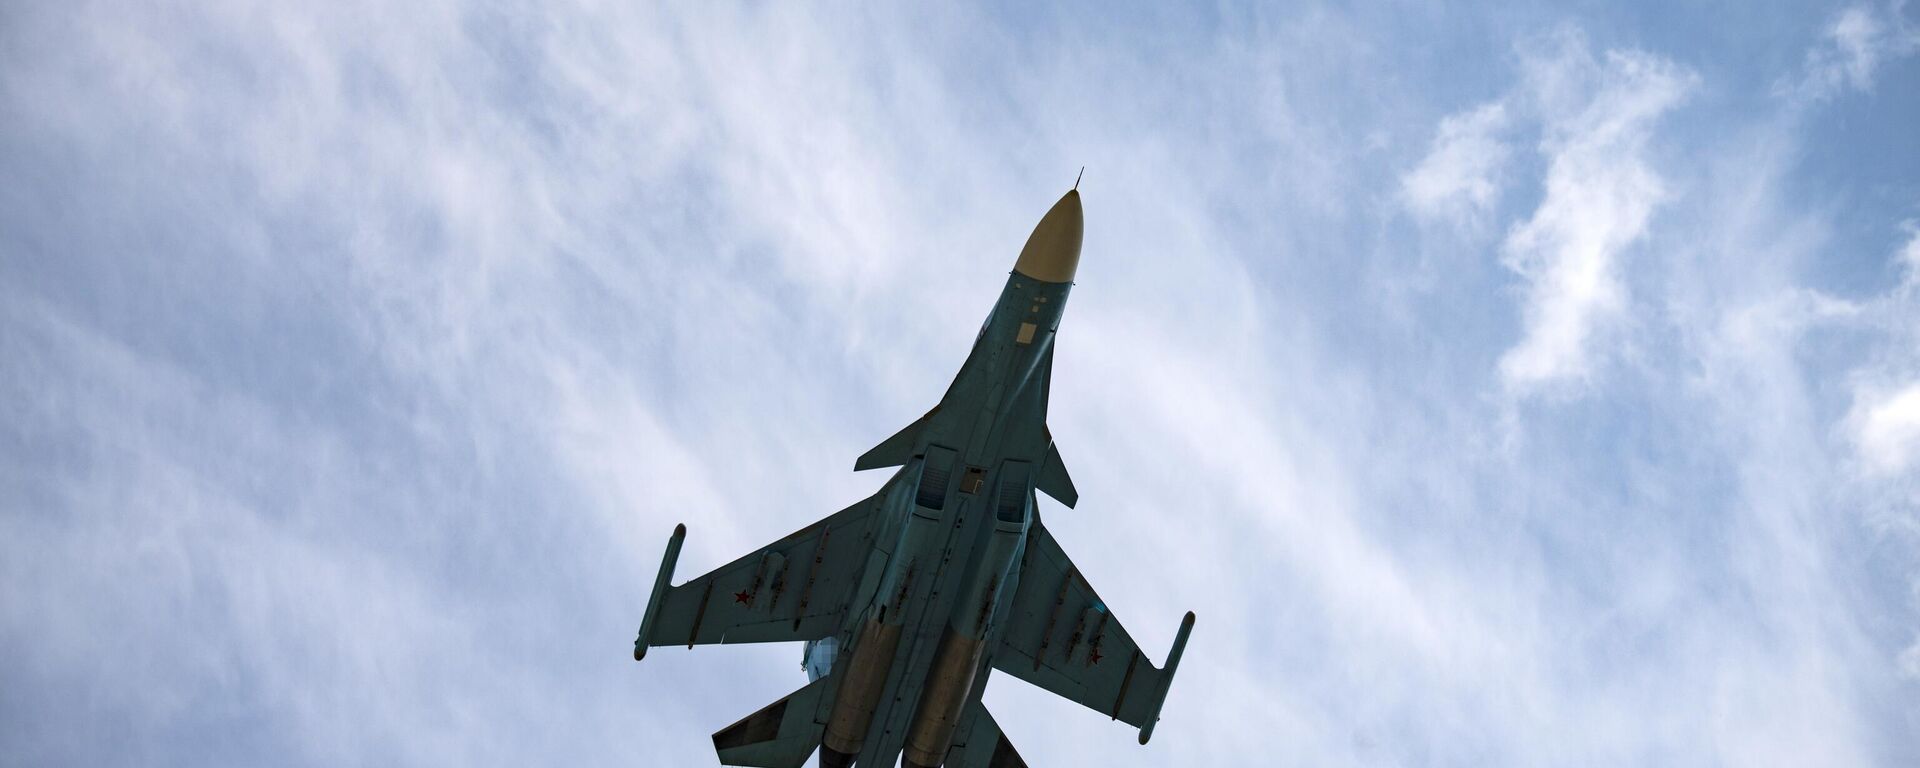 A Russian Sukhoi Su-34 fighter jet flies in the course of Russia's military operation in Ukraine, at the unknown location. - Sputnik International, 1920, 22.03.2024